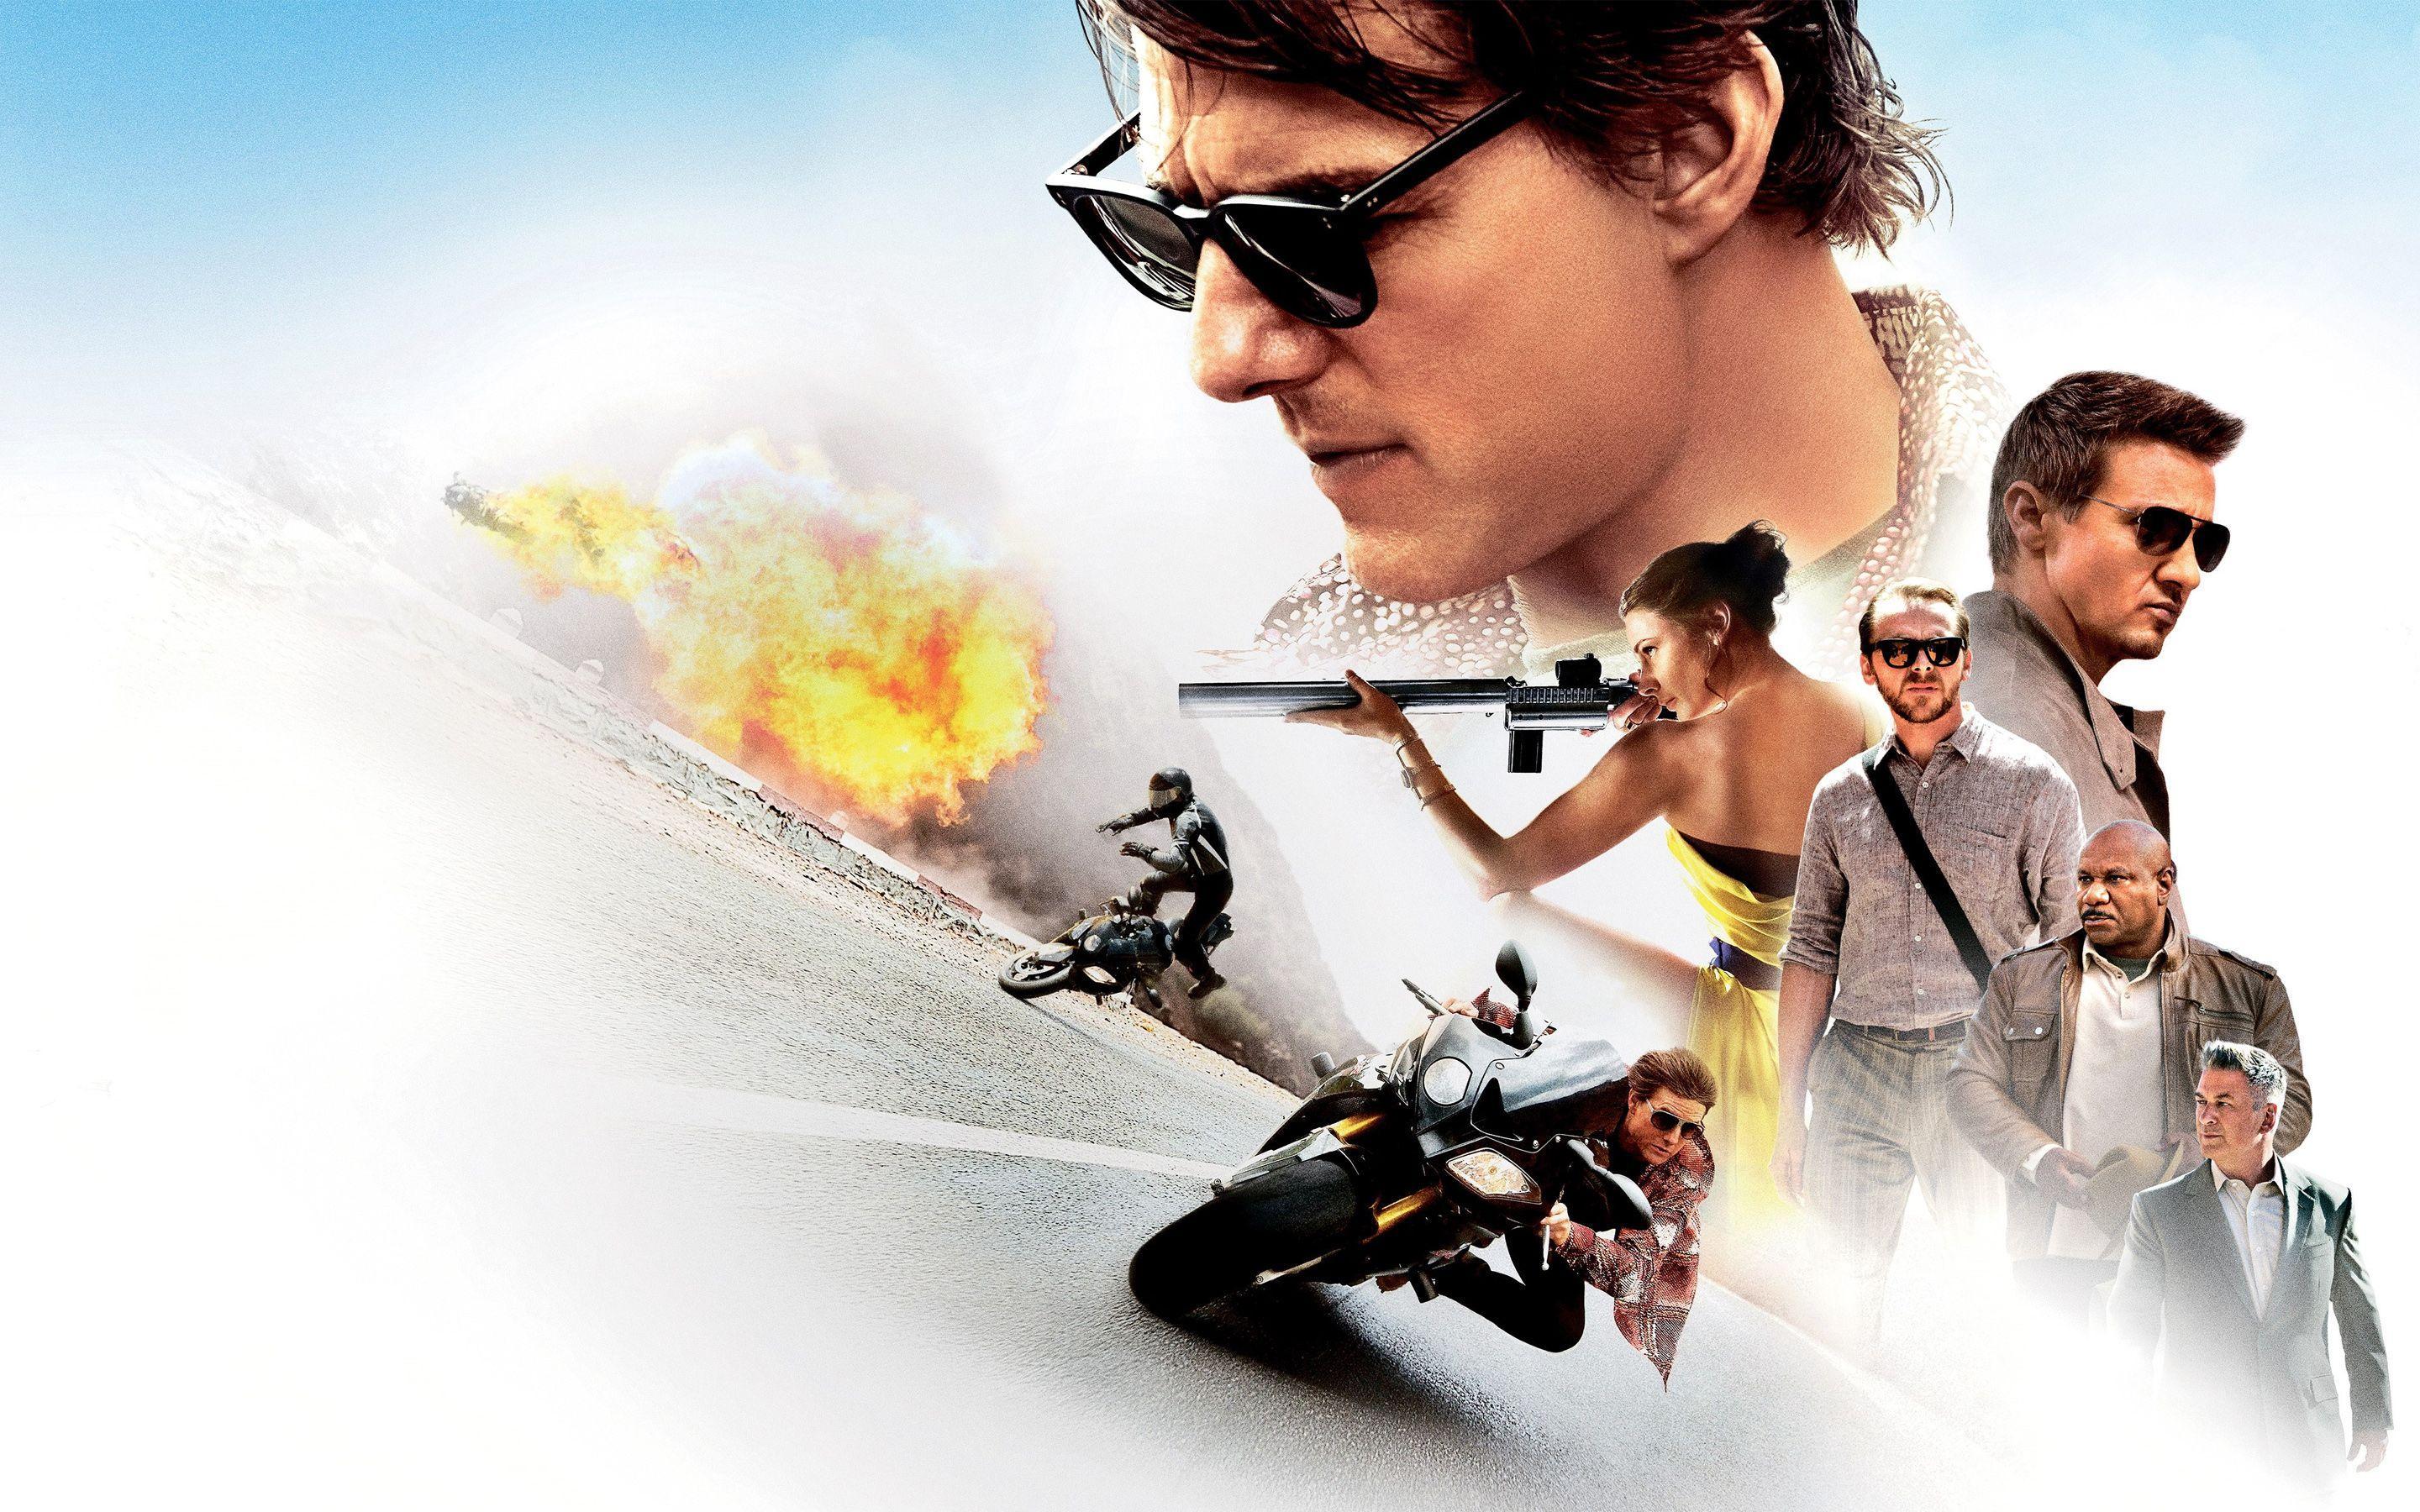 Mission Impossible Wallpaper Free Mission Impossible Background